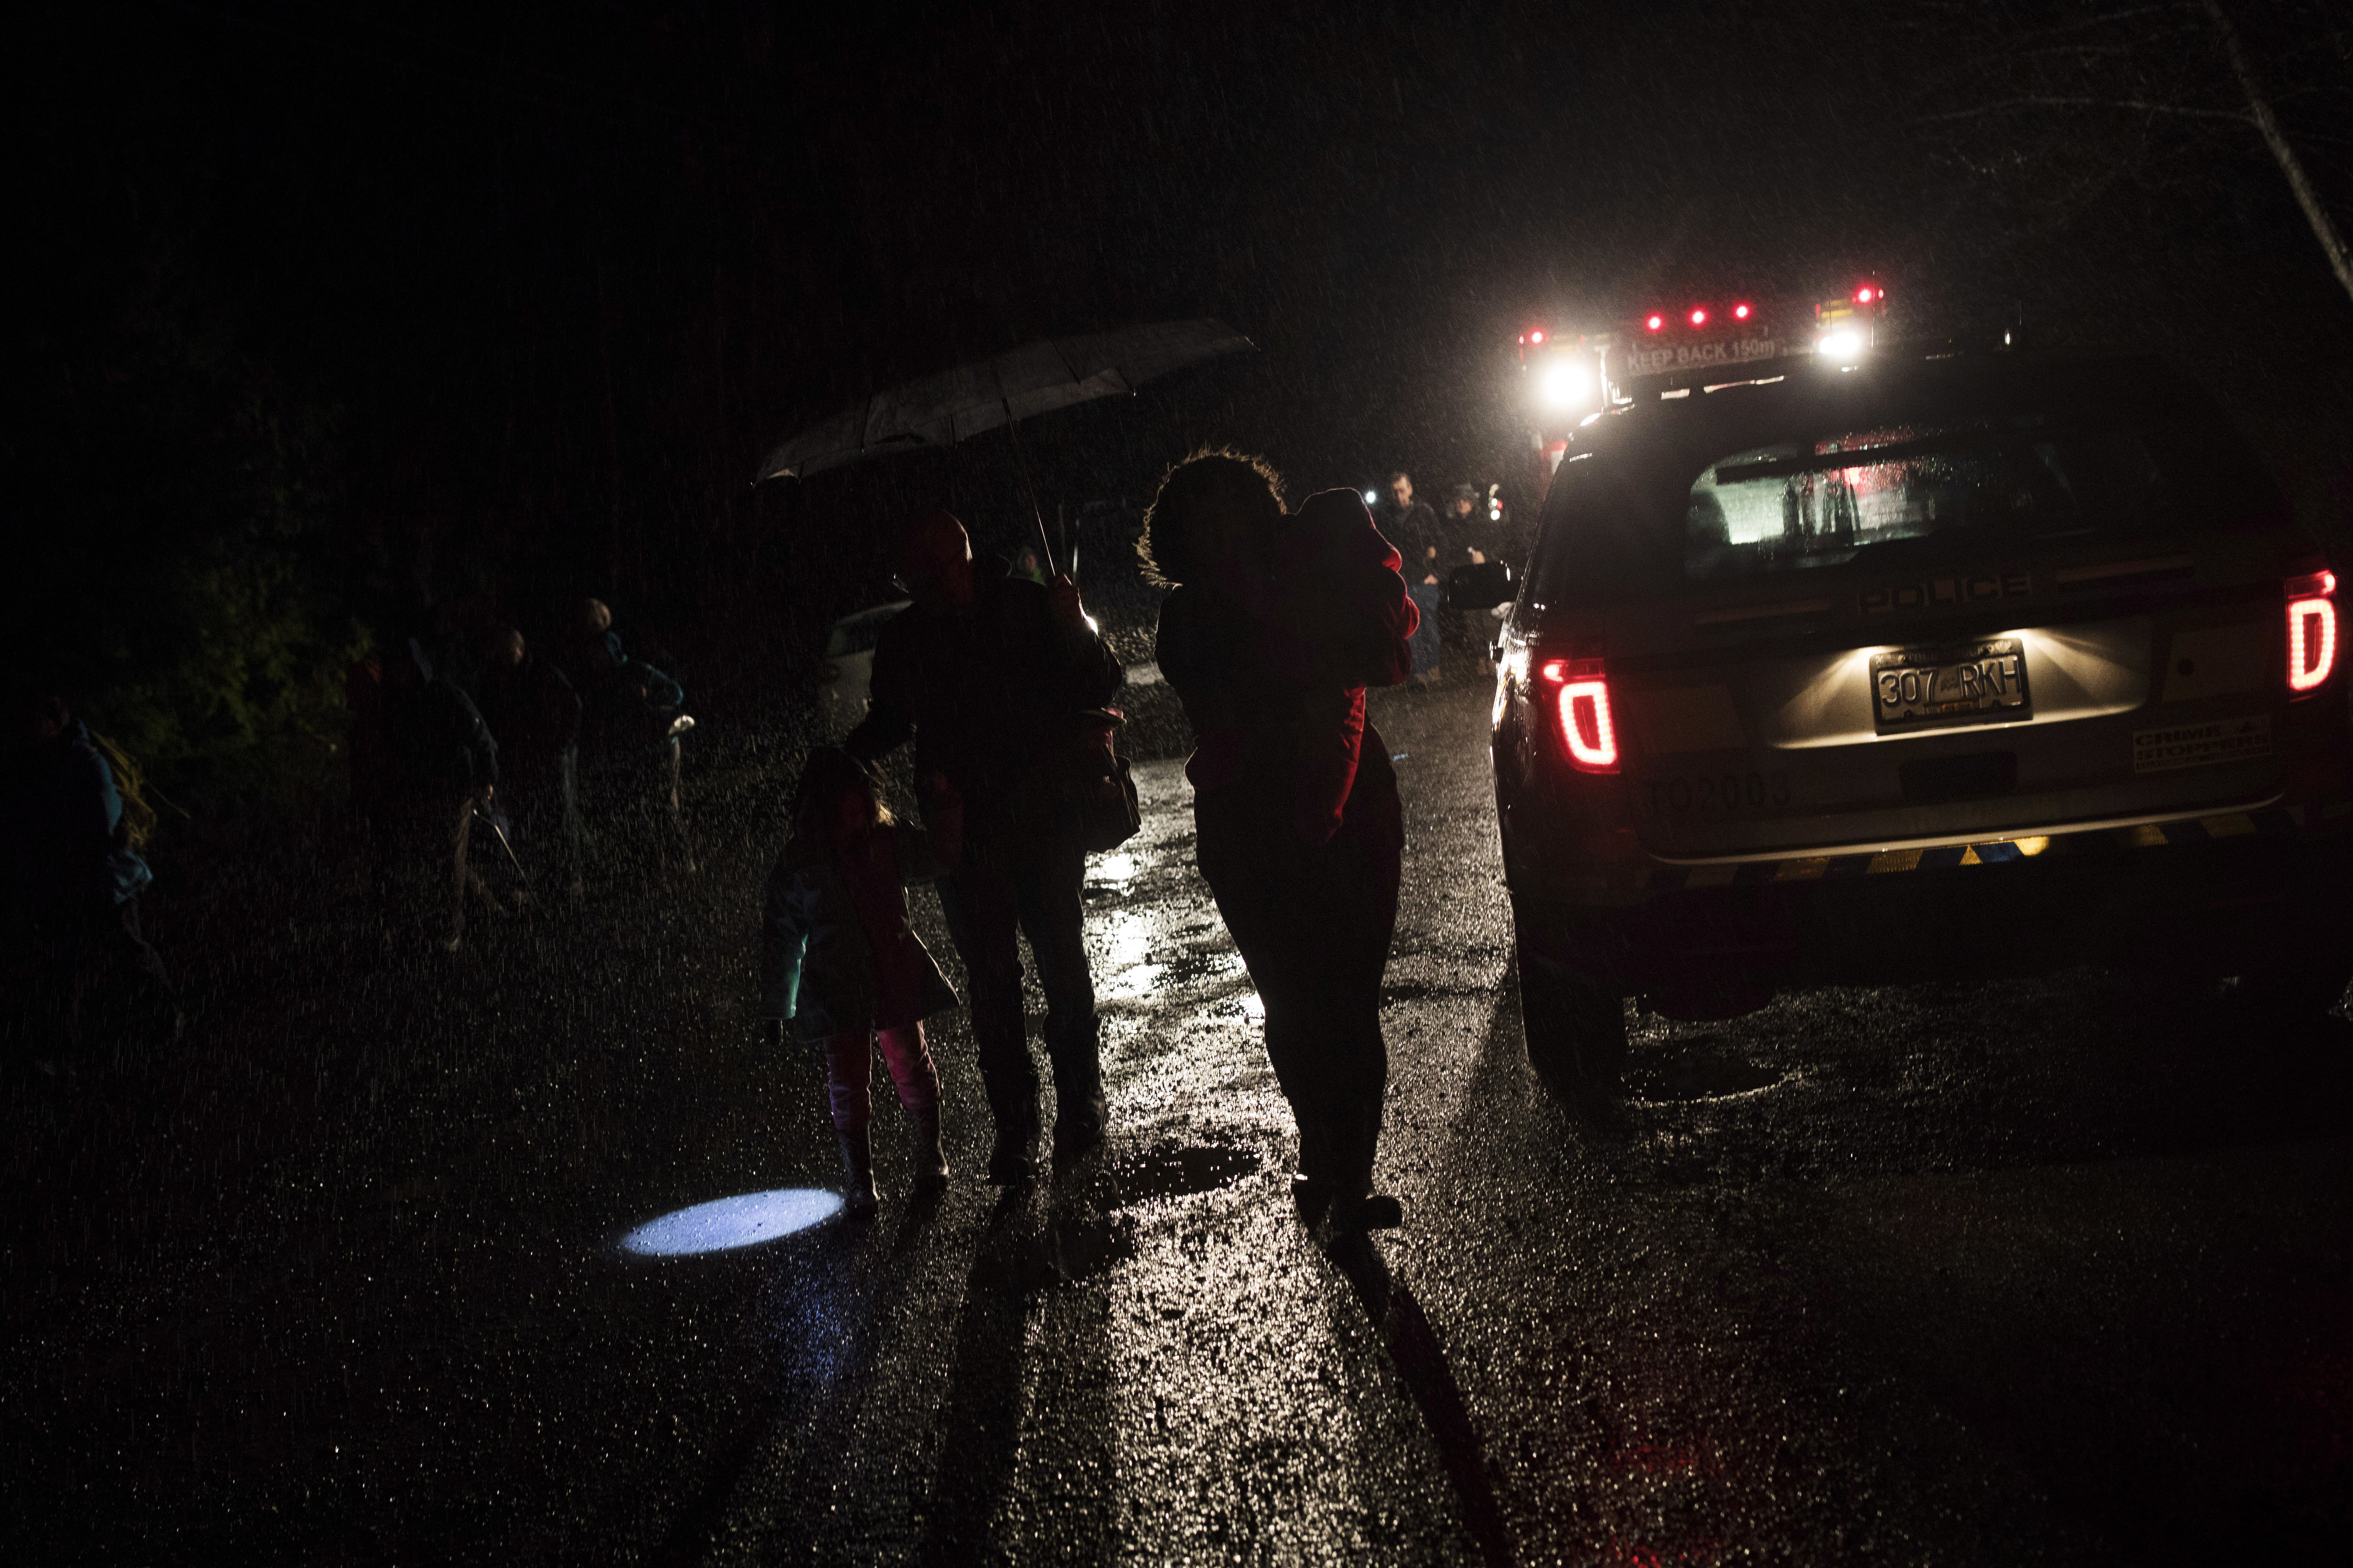 Tofino residents and visitors leave the community center after the tsunami warning ends, in Tofino, British Columbia